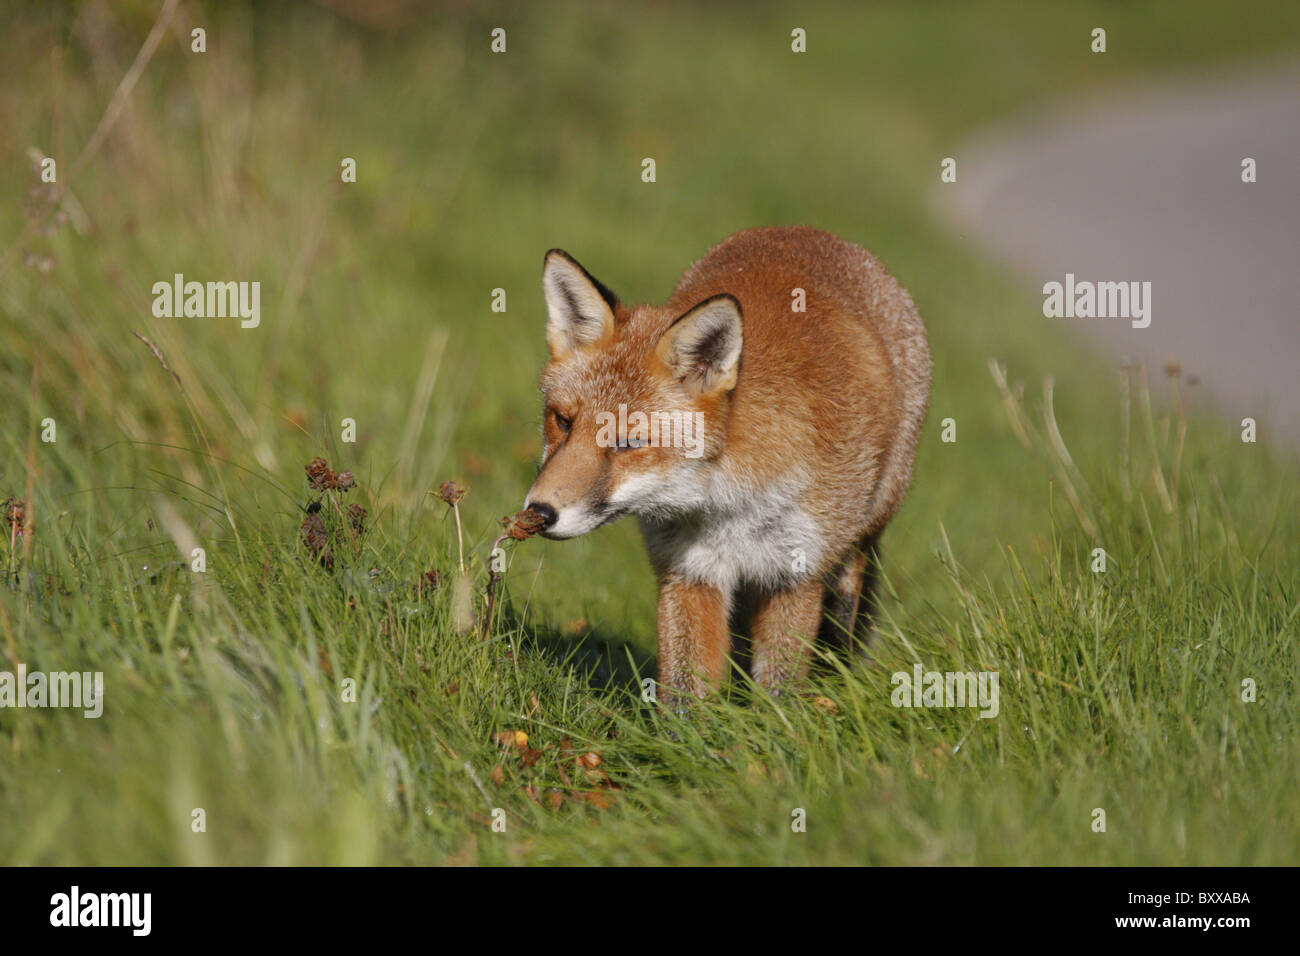 Red fox (Vulpes vulpes) sniffing a plant along a road, Highlands, Scotland, UK Stock Photo